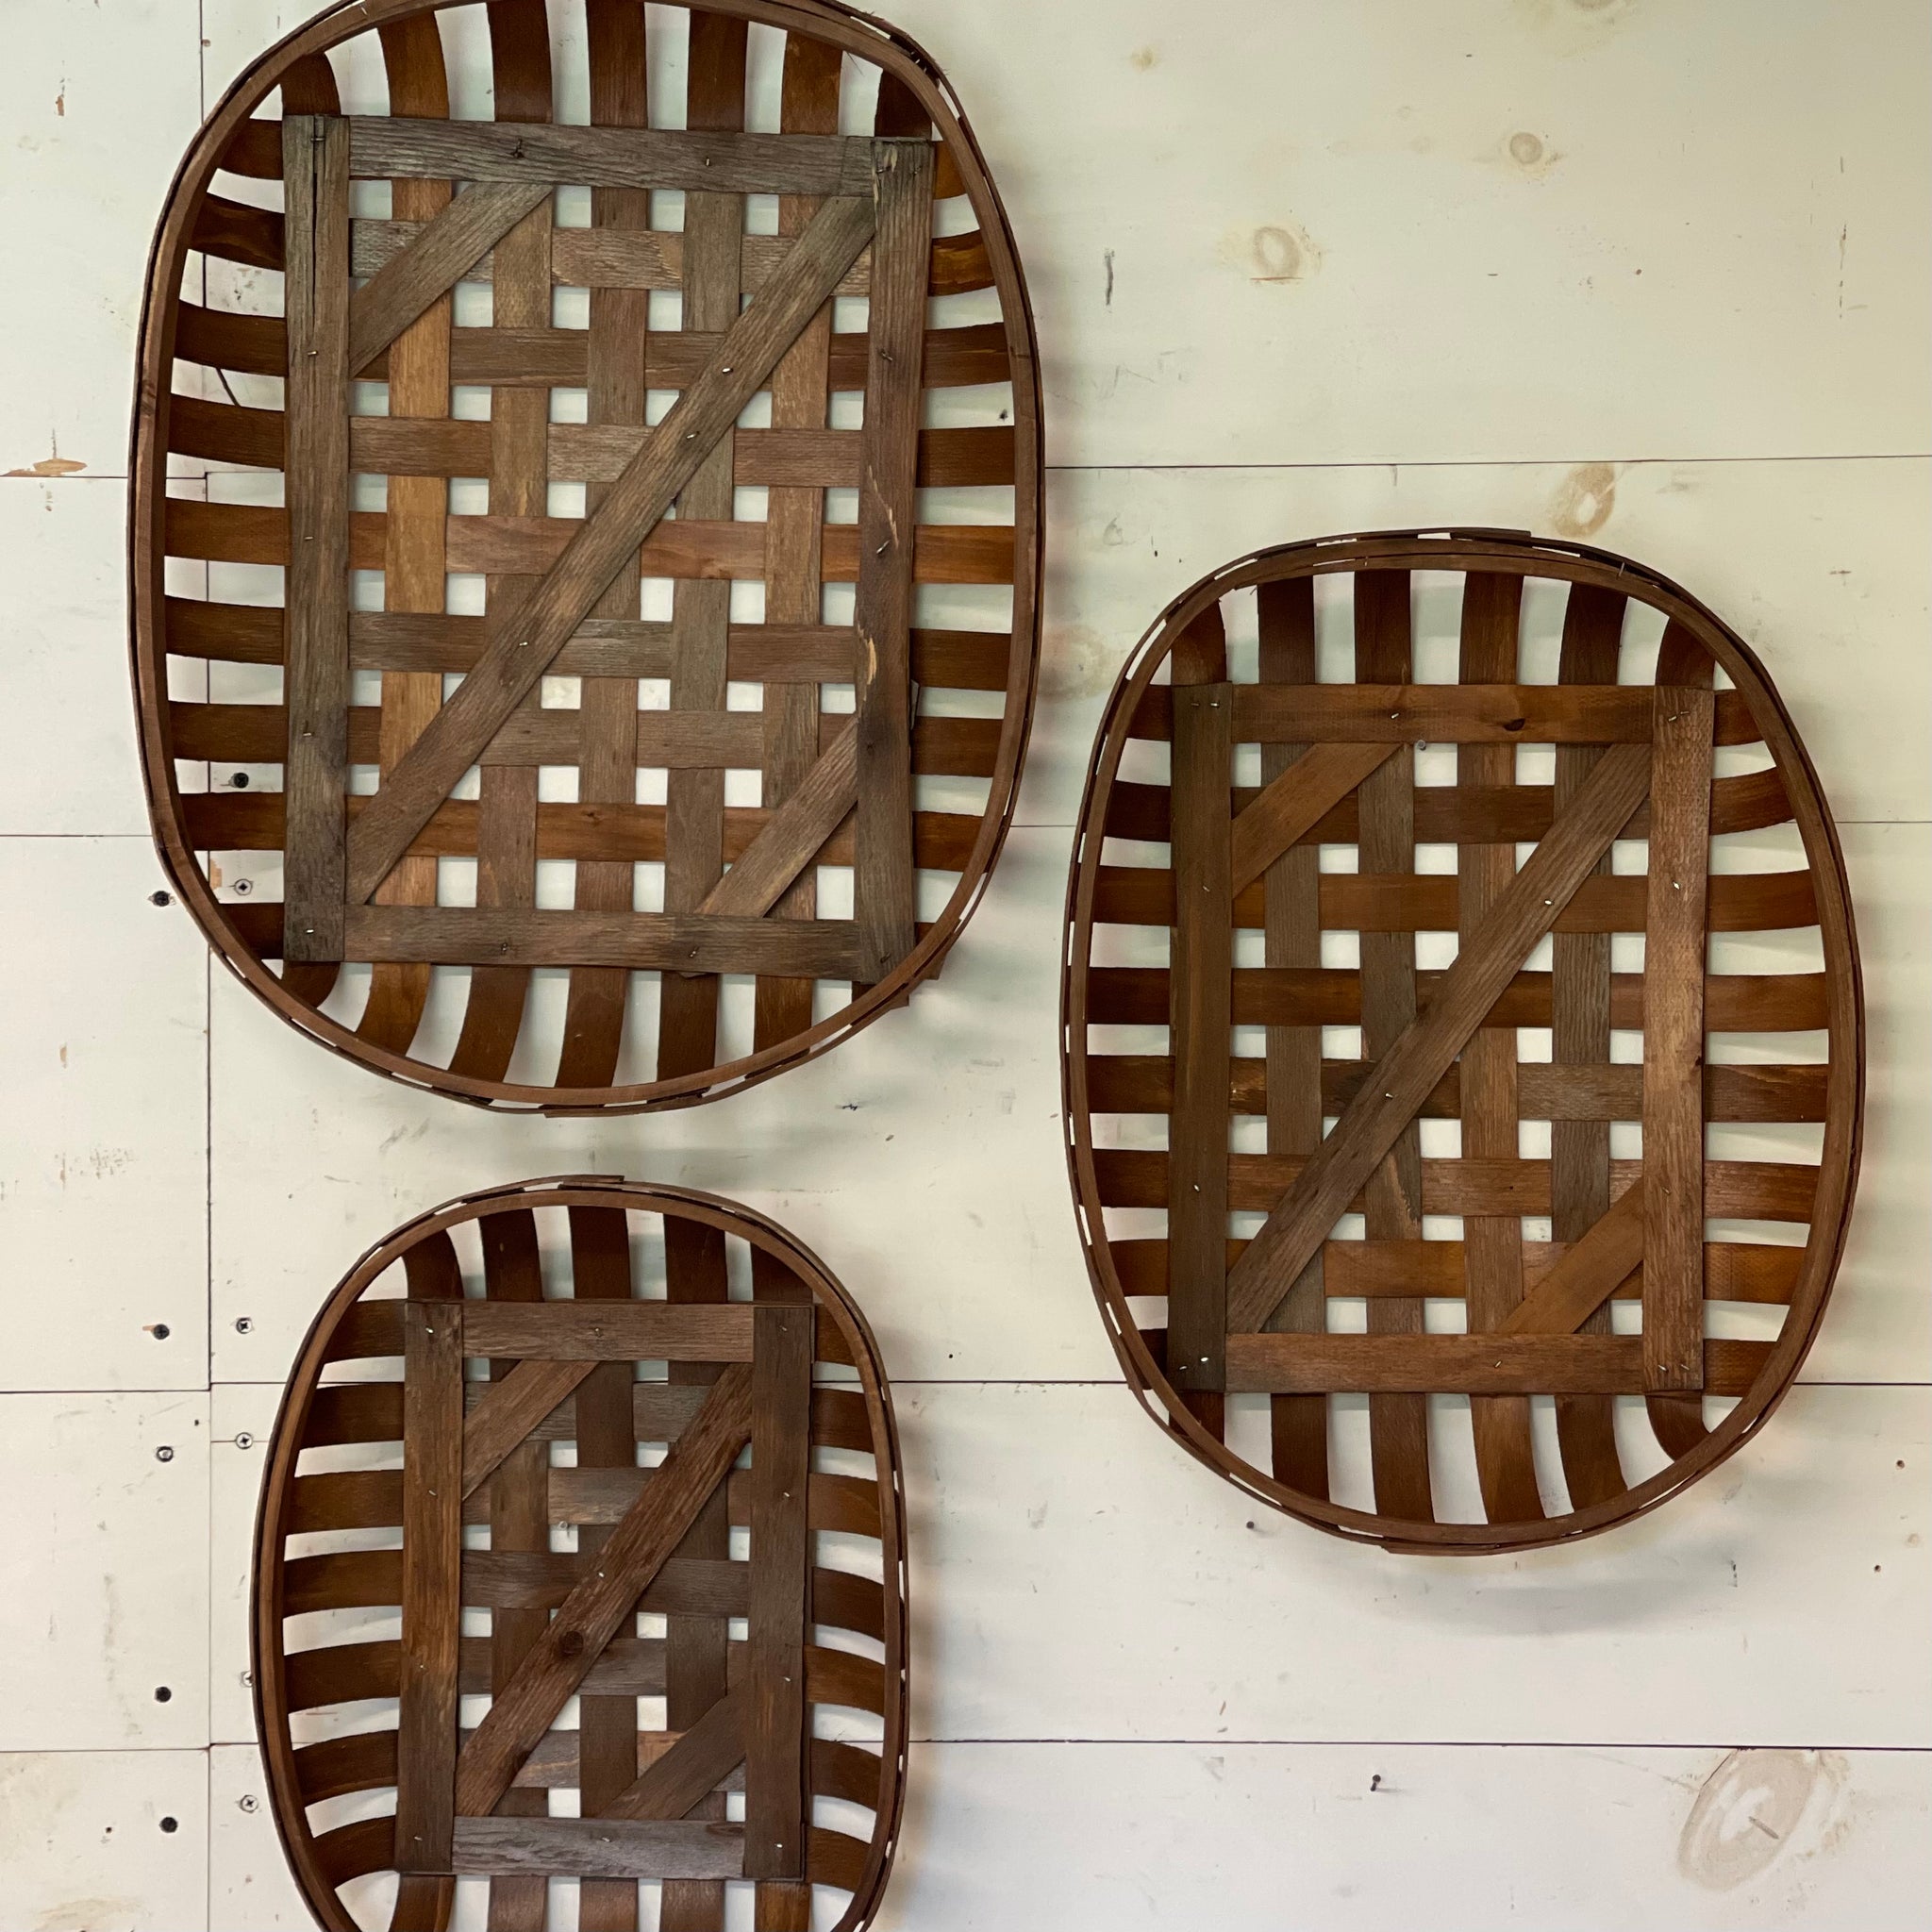 Set of 3 Wooden Wall Baskets